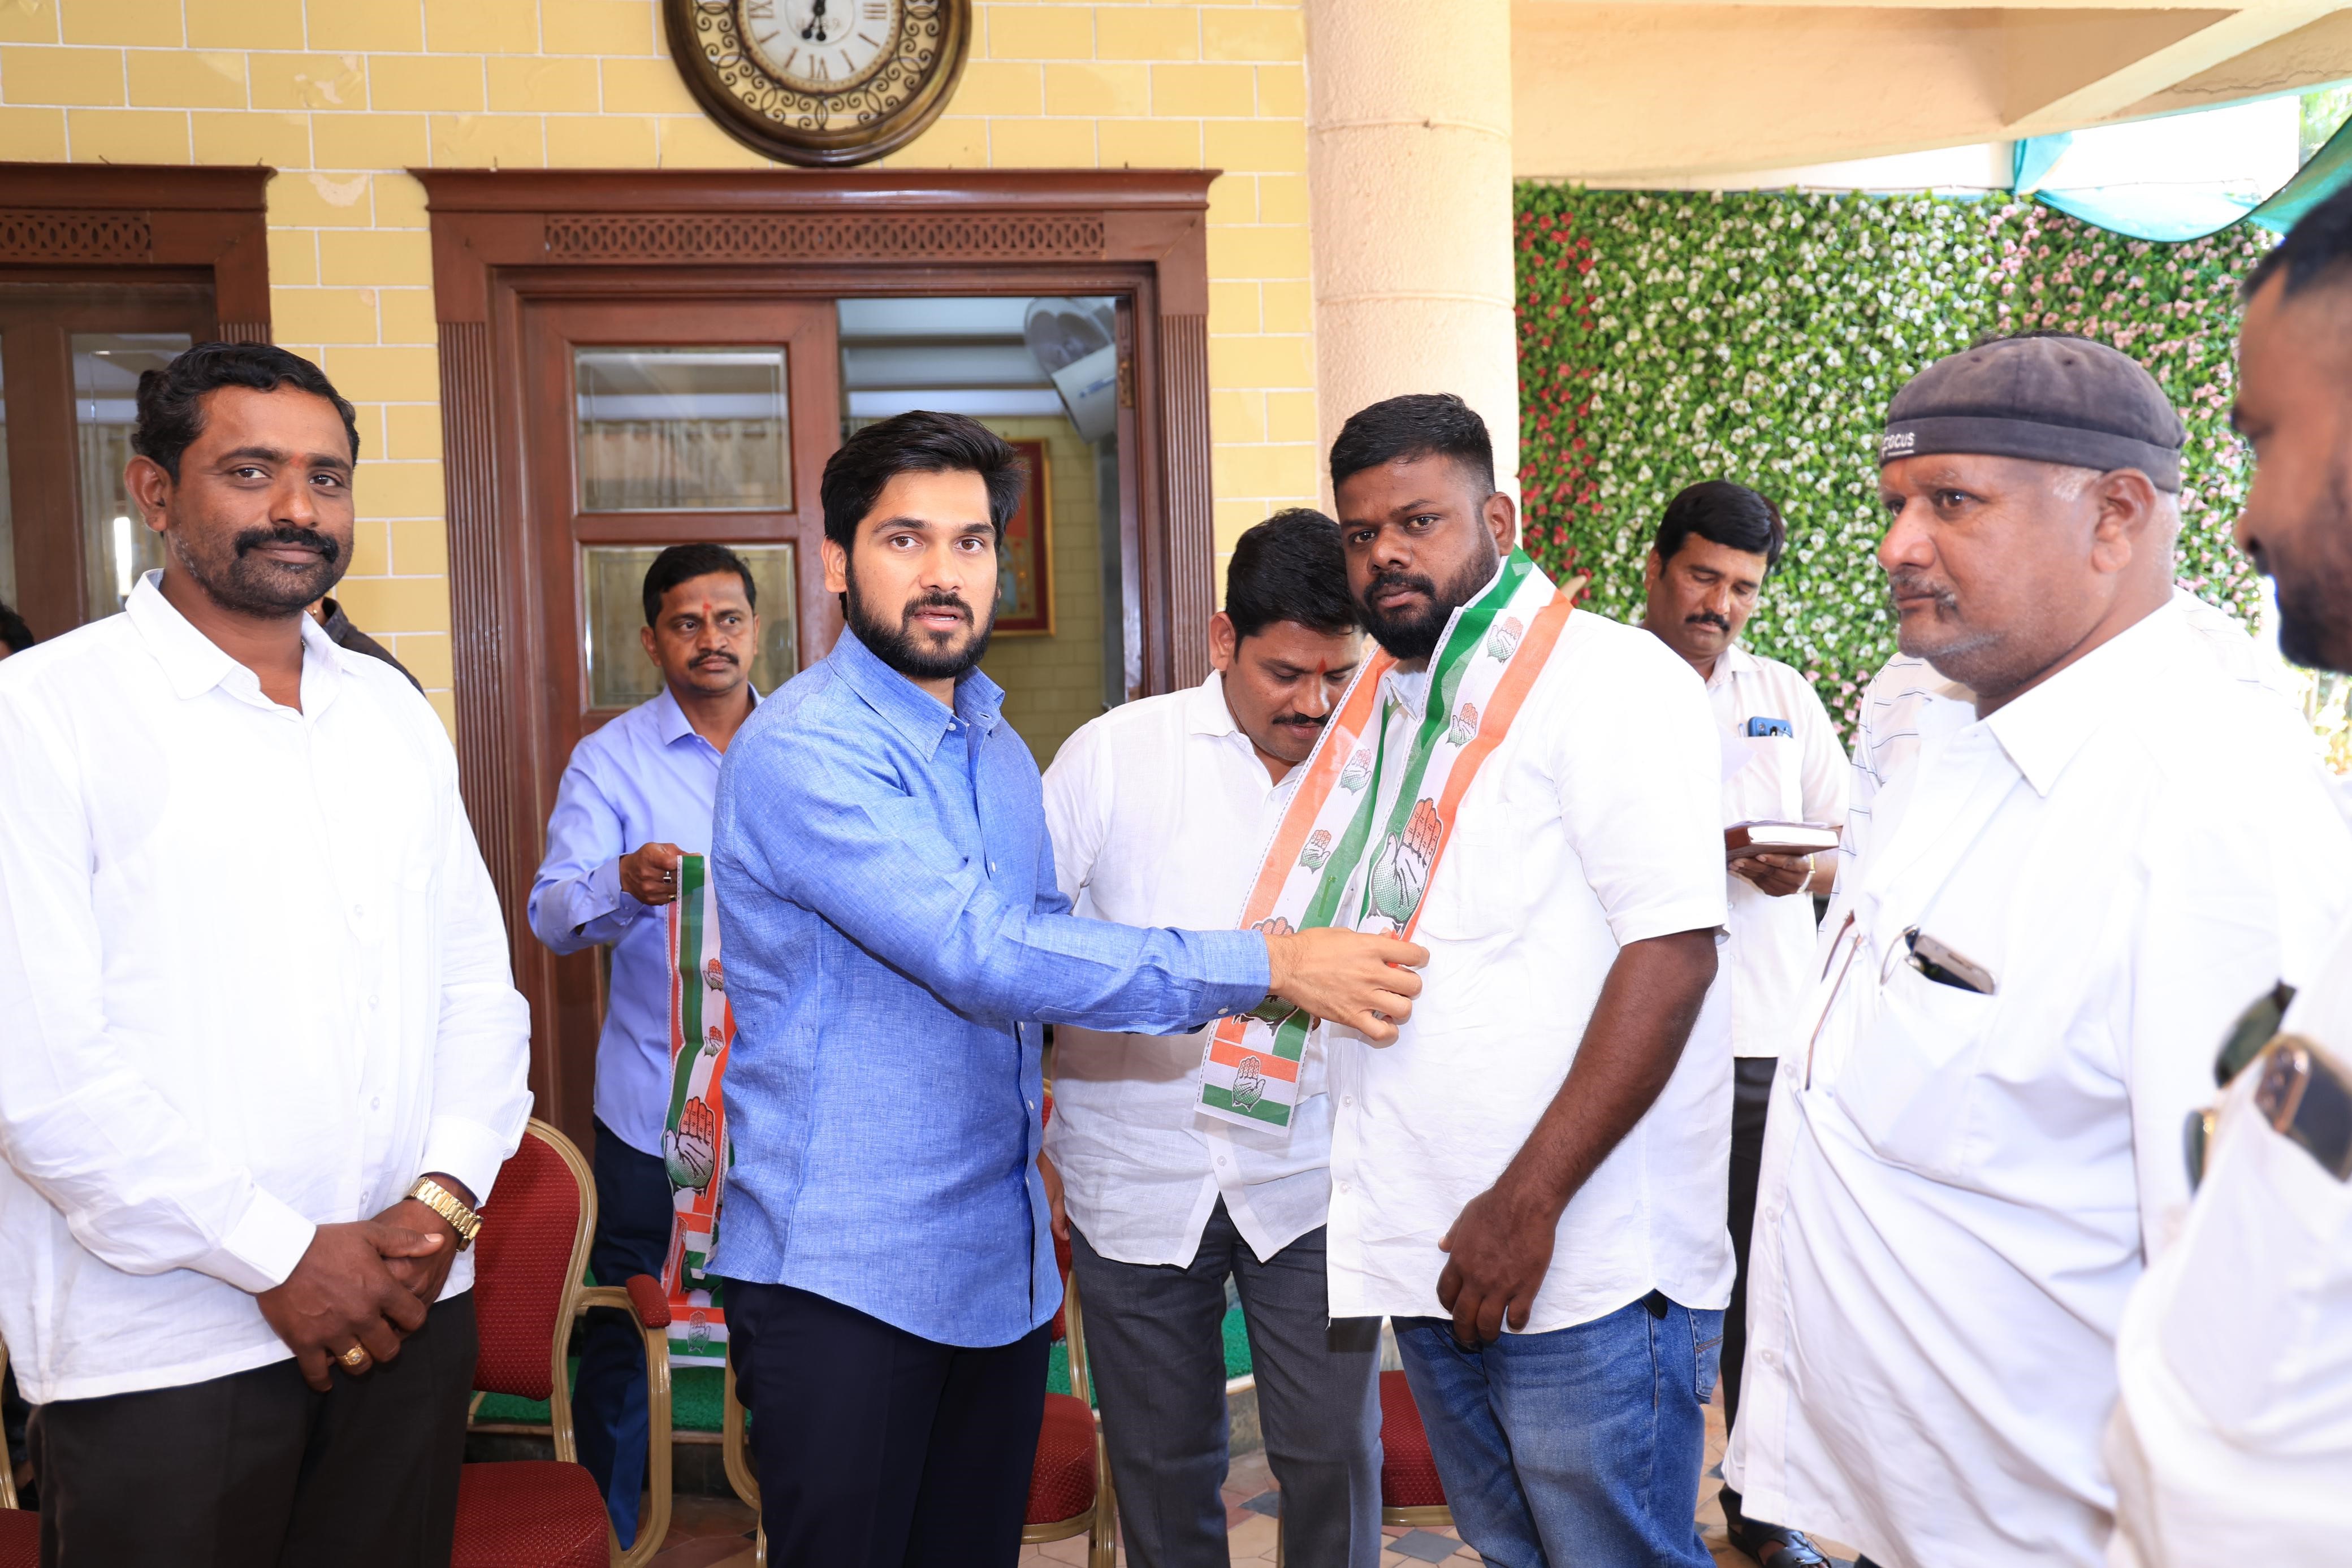 of the Mahadik group at New Wadde  Entry of workers into Congress